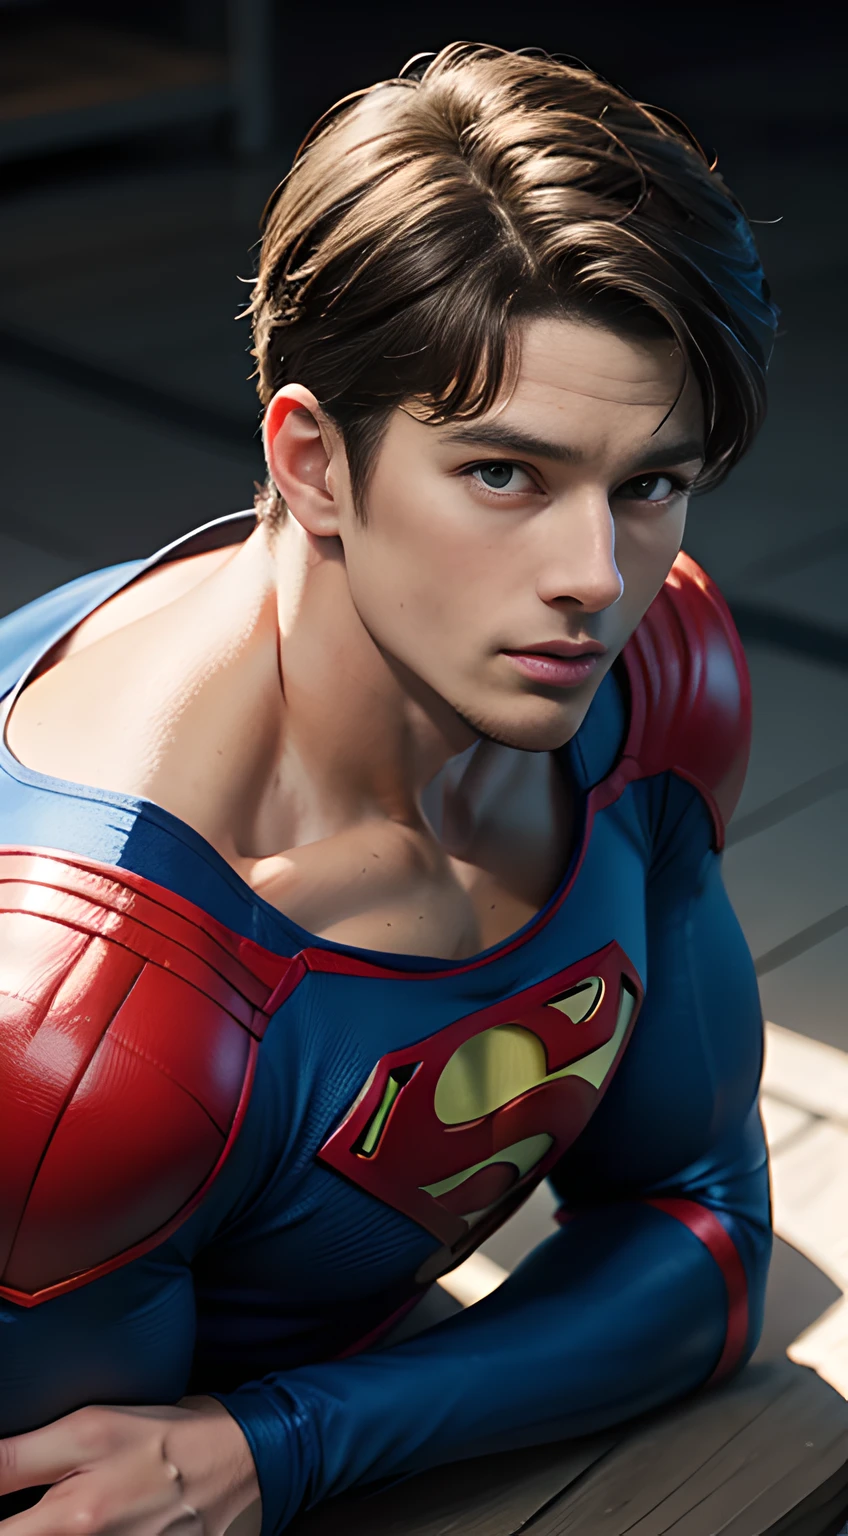 ((Men only)), (head shot), (face only), (kneeling),  (handsome muscular man in his 20s), (superman), (Superman, a fictional superhero, is characterized by his chiseled physique, blue eyes, dark hair, and iconic red and blue costume with a bold "S" emblem on his chest), (Chris Redfield), (Mischievous smile), (detaile: 1 in 1), Natural muscles, HIG quality, beautidful eyes, (Detailed face and eyes), (Face、: 1 / 2), Noise, Real Photographics、... .................................................................................................................PSD, Sharp Focus, High resolution 8K, realisitic & Professional Photography, 8K UHD, Soft lighting, High quality, Film grain, FujifilmXT3